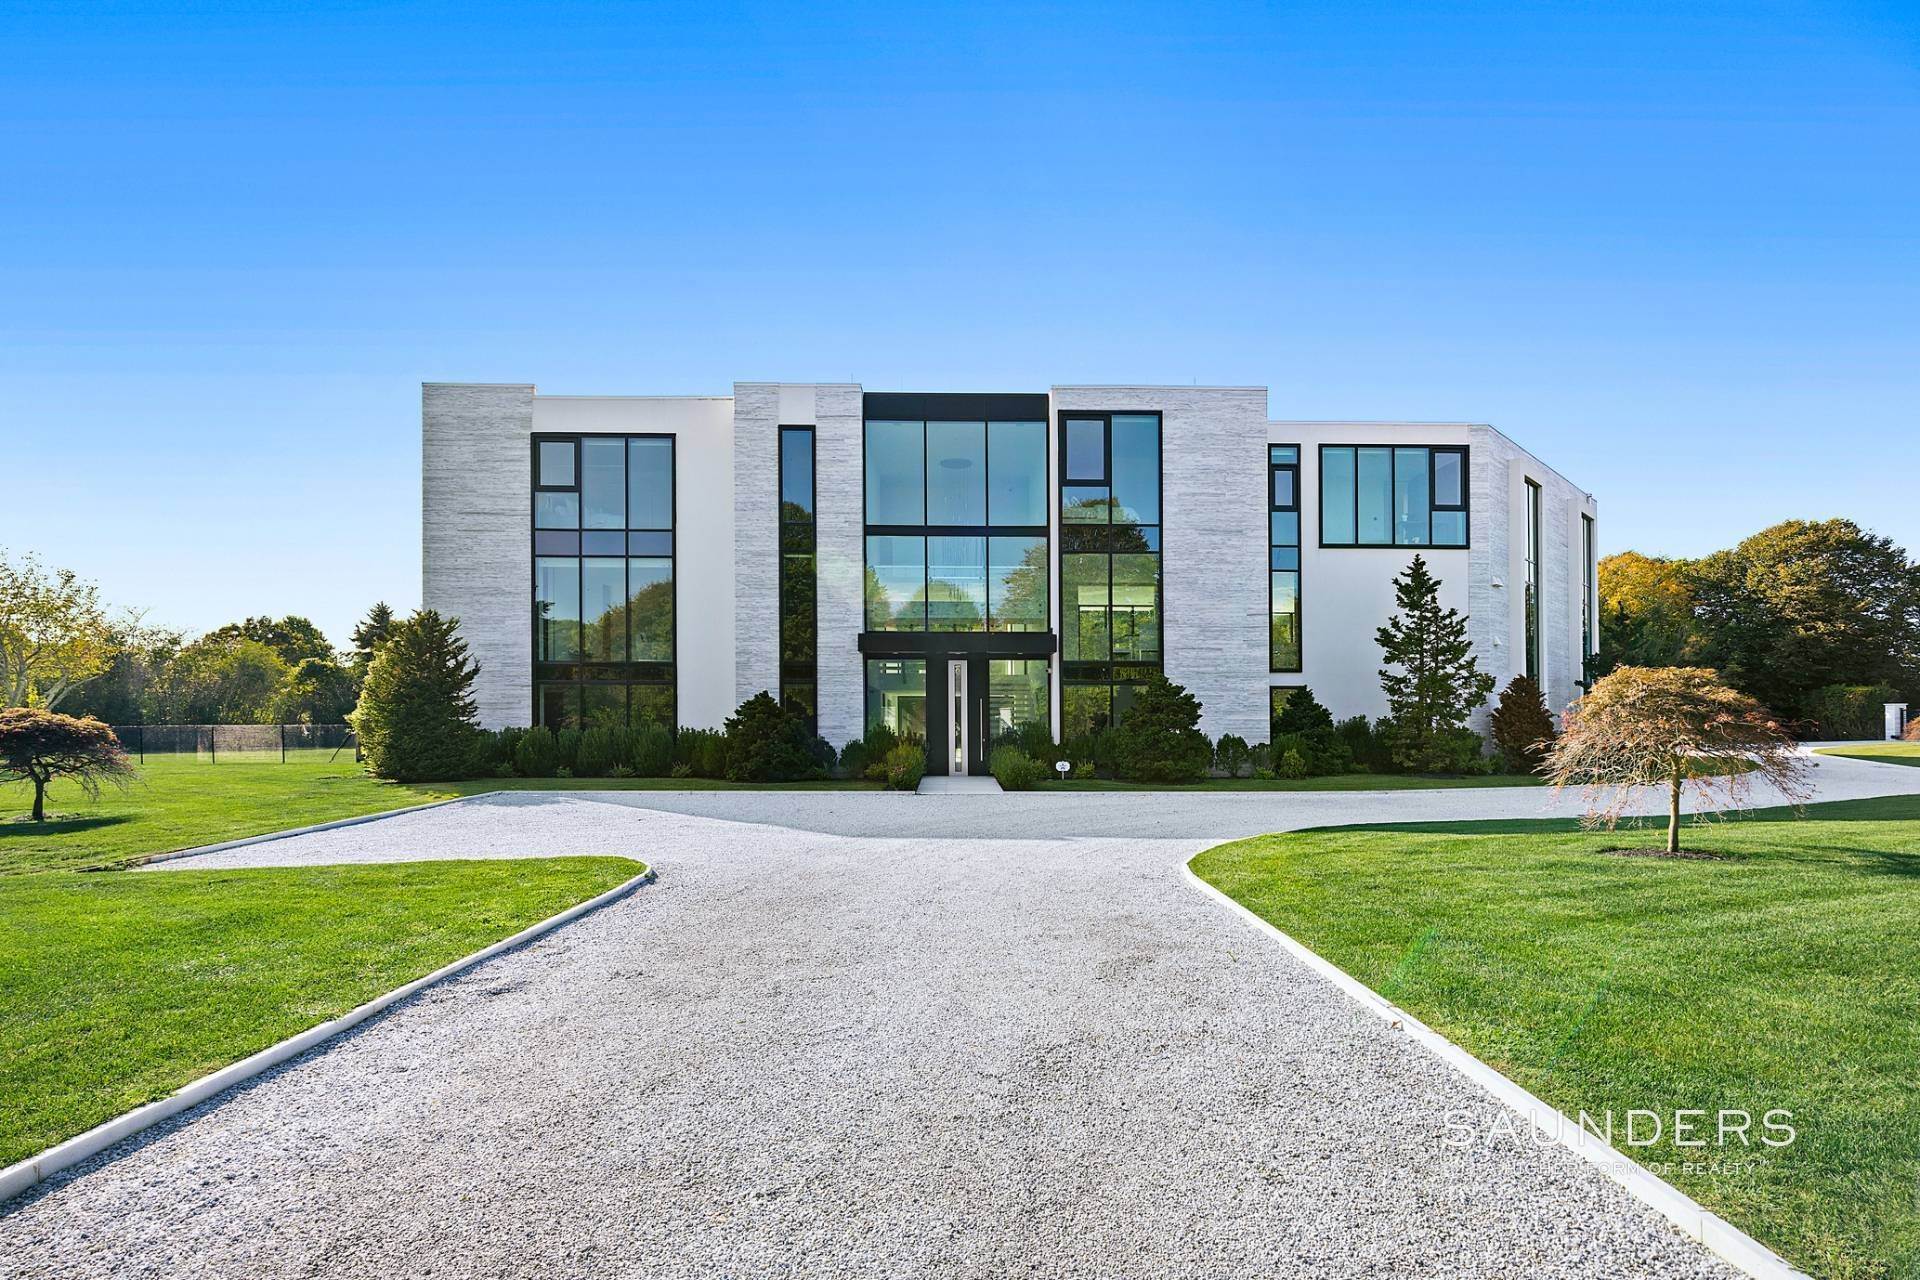 Single Family Homes for Sale at Cutting-Edge New Construction South Of The Highway 88 Rose Way, Bridgehampton, NY 11976